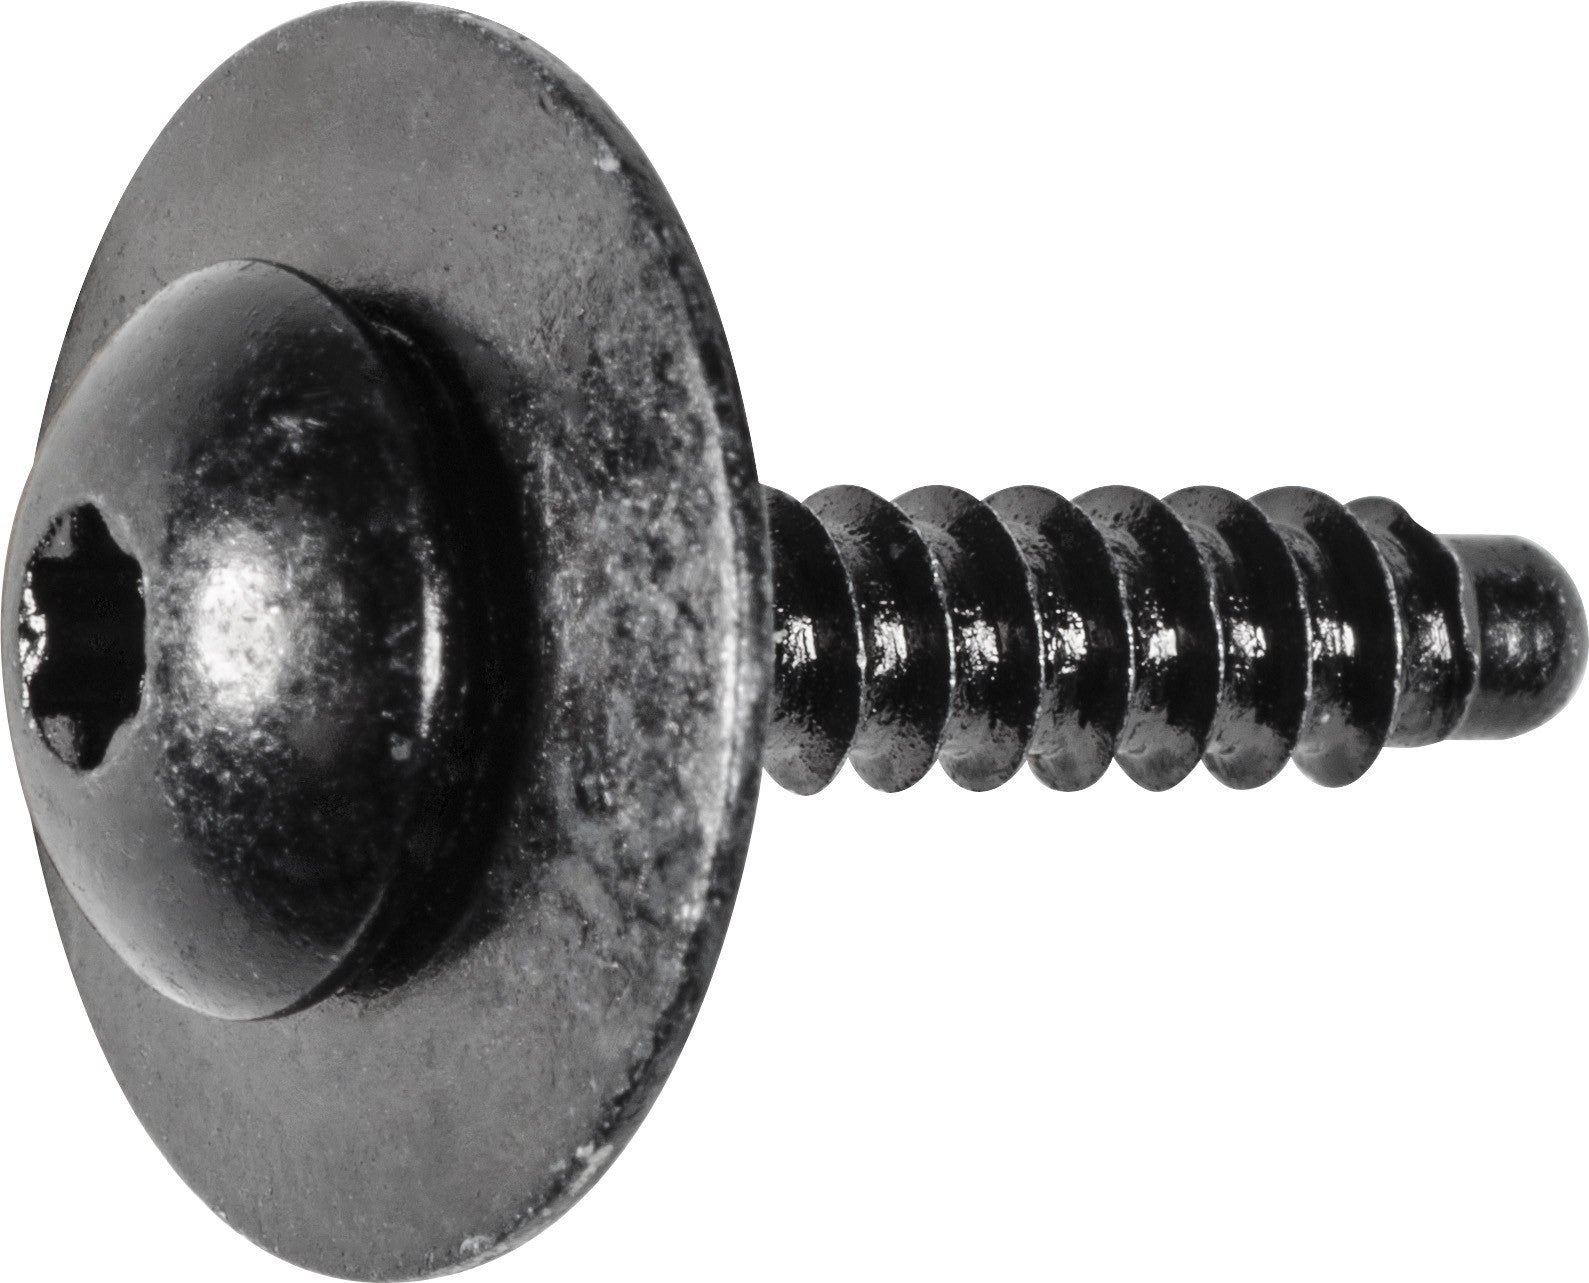 Auveco 22070 GM Torx, Pan Head SEMS Tapping Screw With Dog Point, M4 2-1 41 X 20, 17mm Washer, T15 Drive Qty 50 